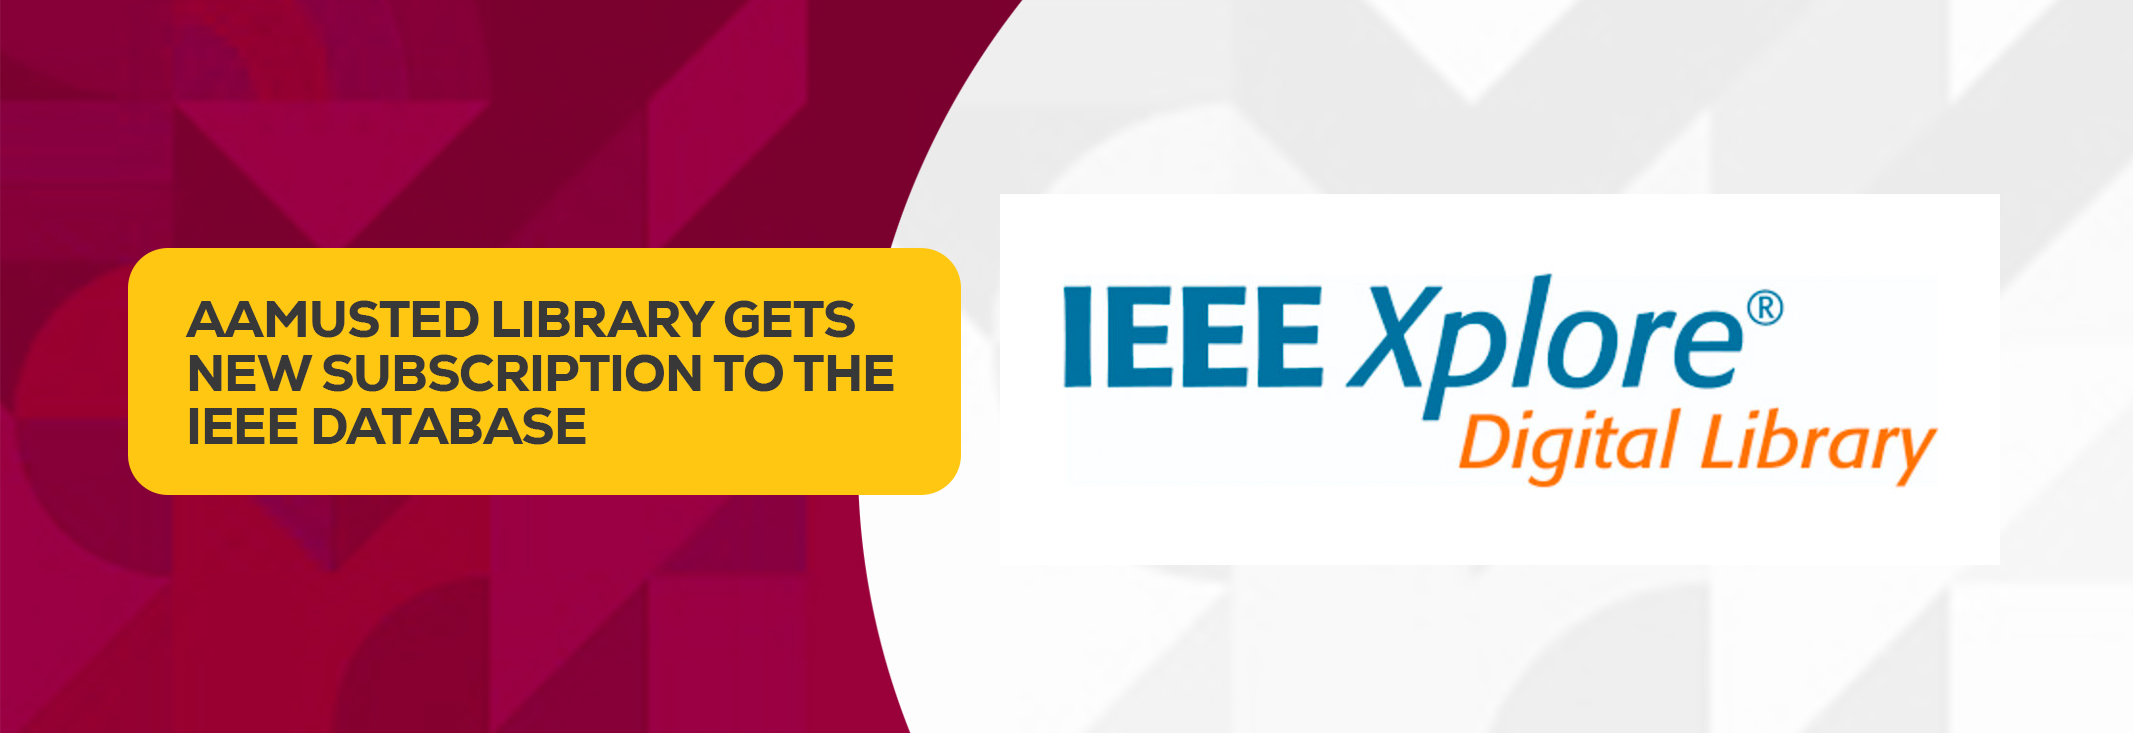 AAMUSTED LIBRARY GETS NEW SUBSCRIPTION TO THE IEEE DATABASE copy